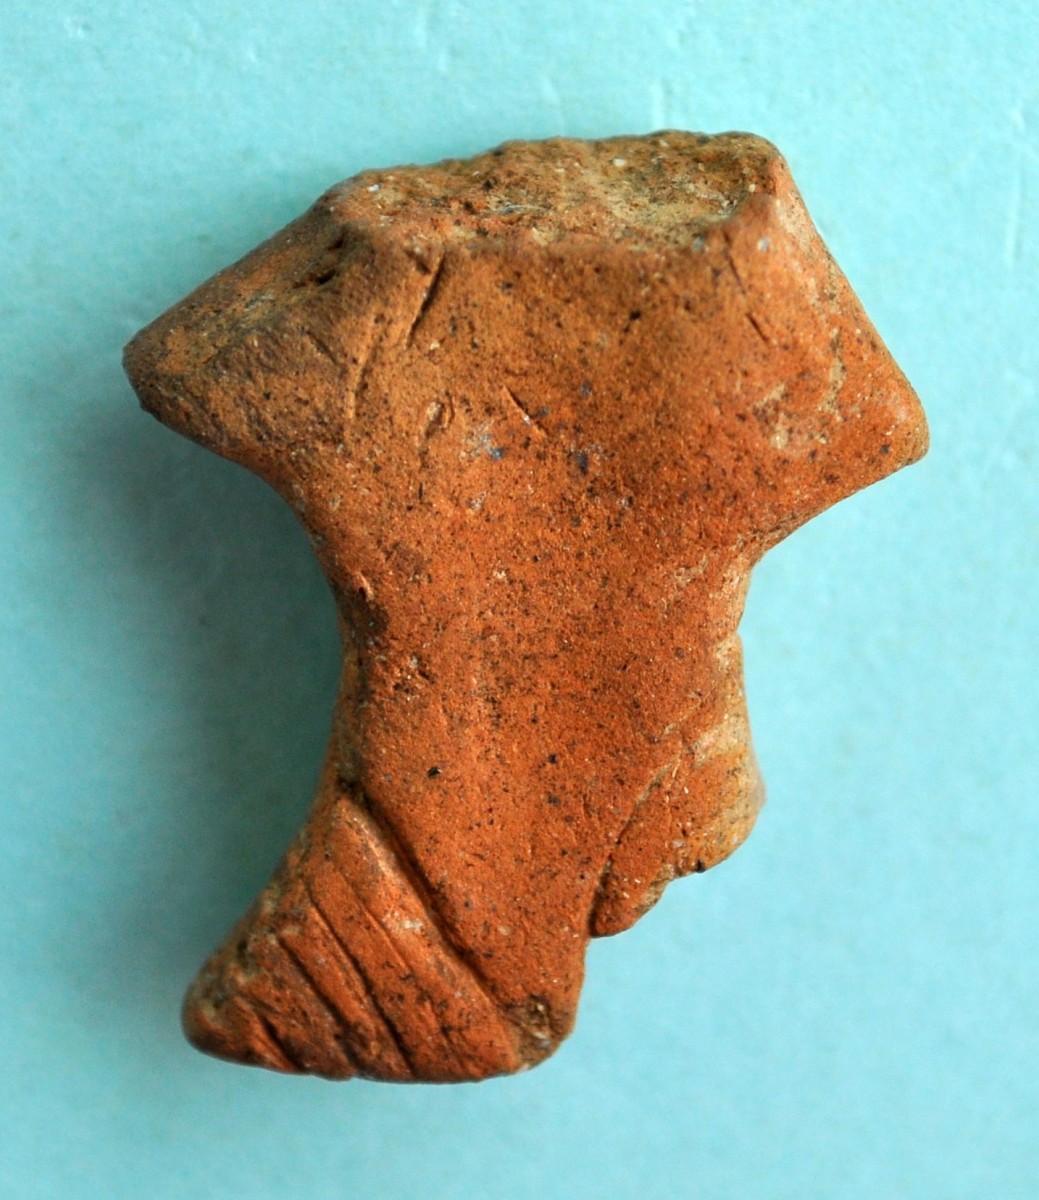 Fig. 5. Stylized, clay anthropomorphic figurine with no indication of gender.